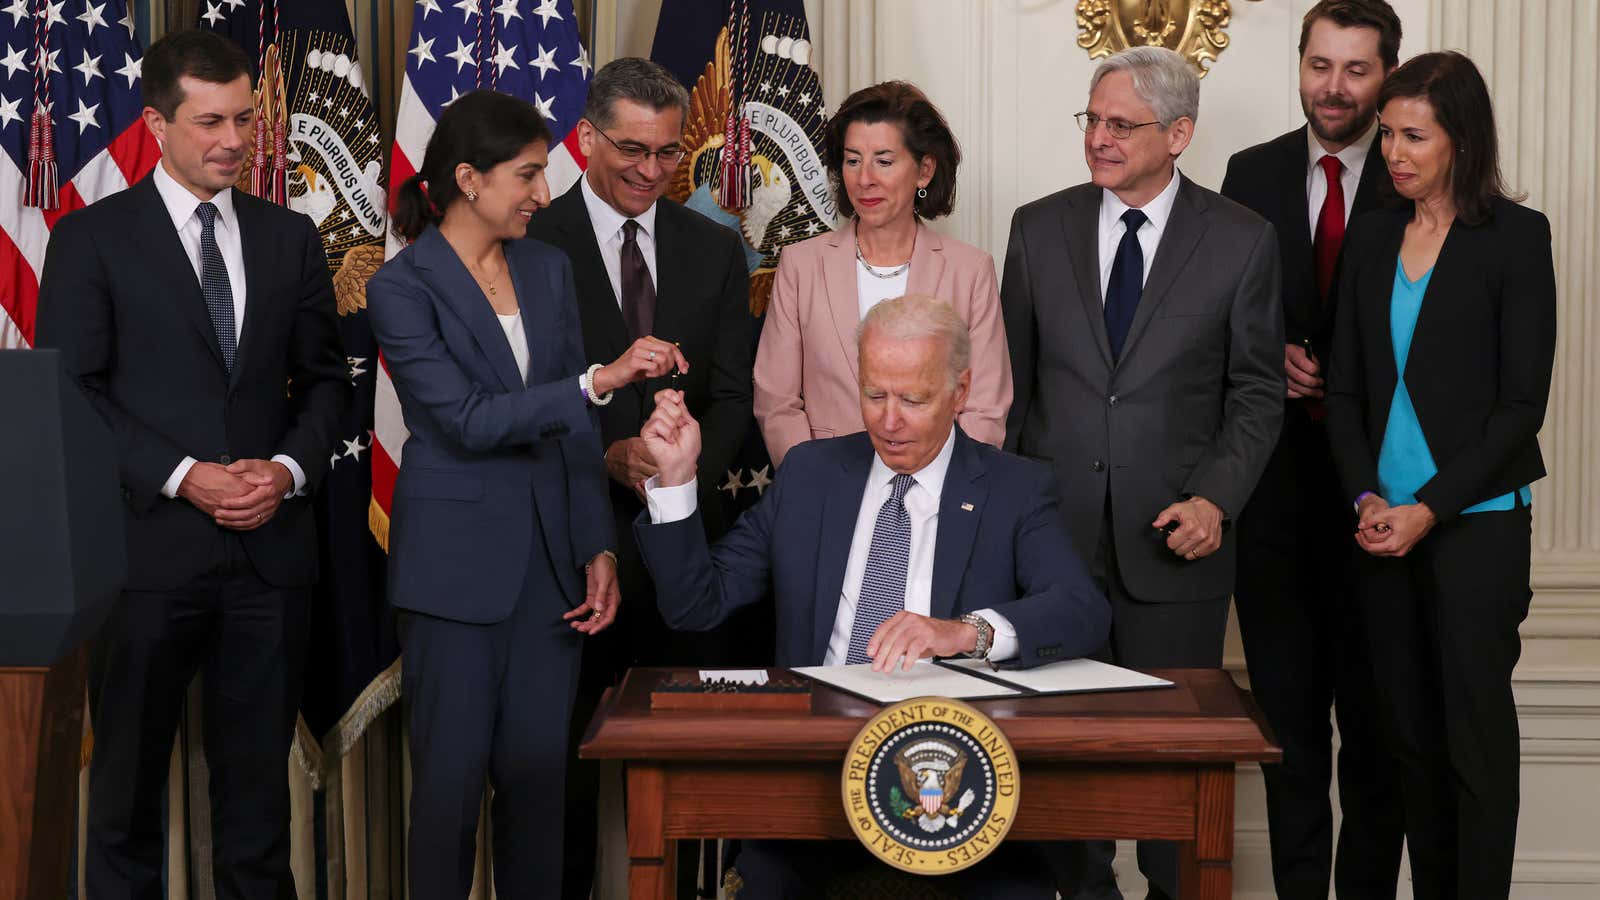 President Biden signed an executive order in 2021 to promote competitiveness in the American economy.